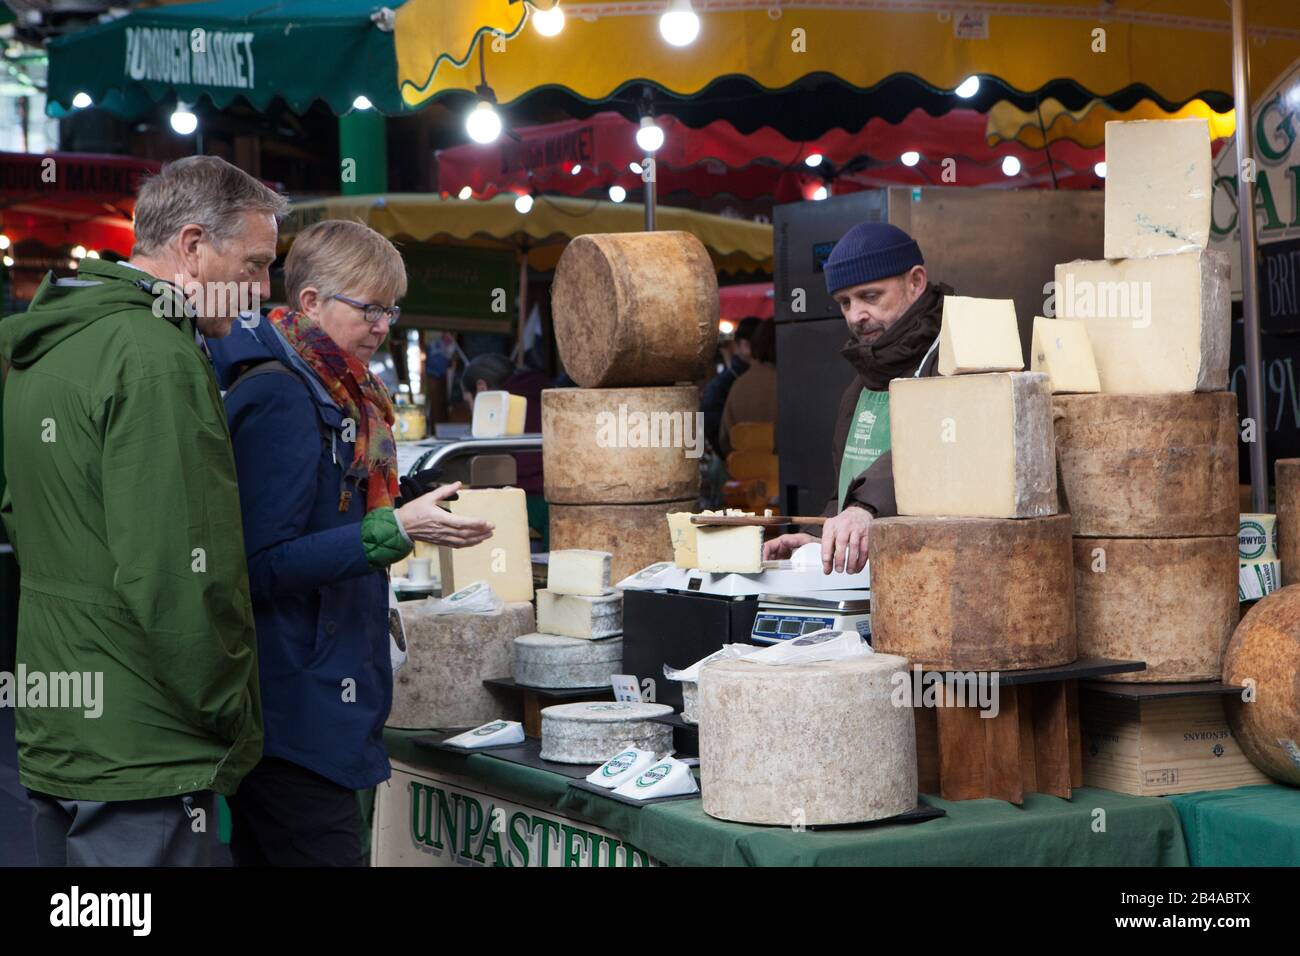 London, UK. 6th March, 2020. Londoners and tourists took advantage of a sunny day to visit the famour Borough food market without wearing facemasks, showing a 'business as usual' attitude to the Corvid-19 coronavirus. Anna Watson/Alamy Live News Stock Photo